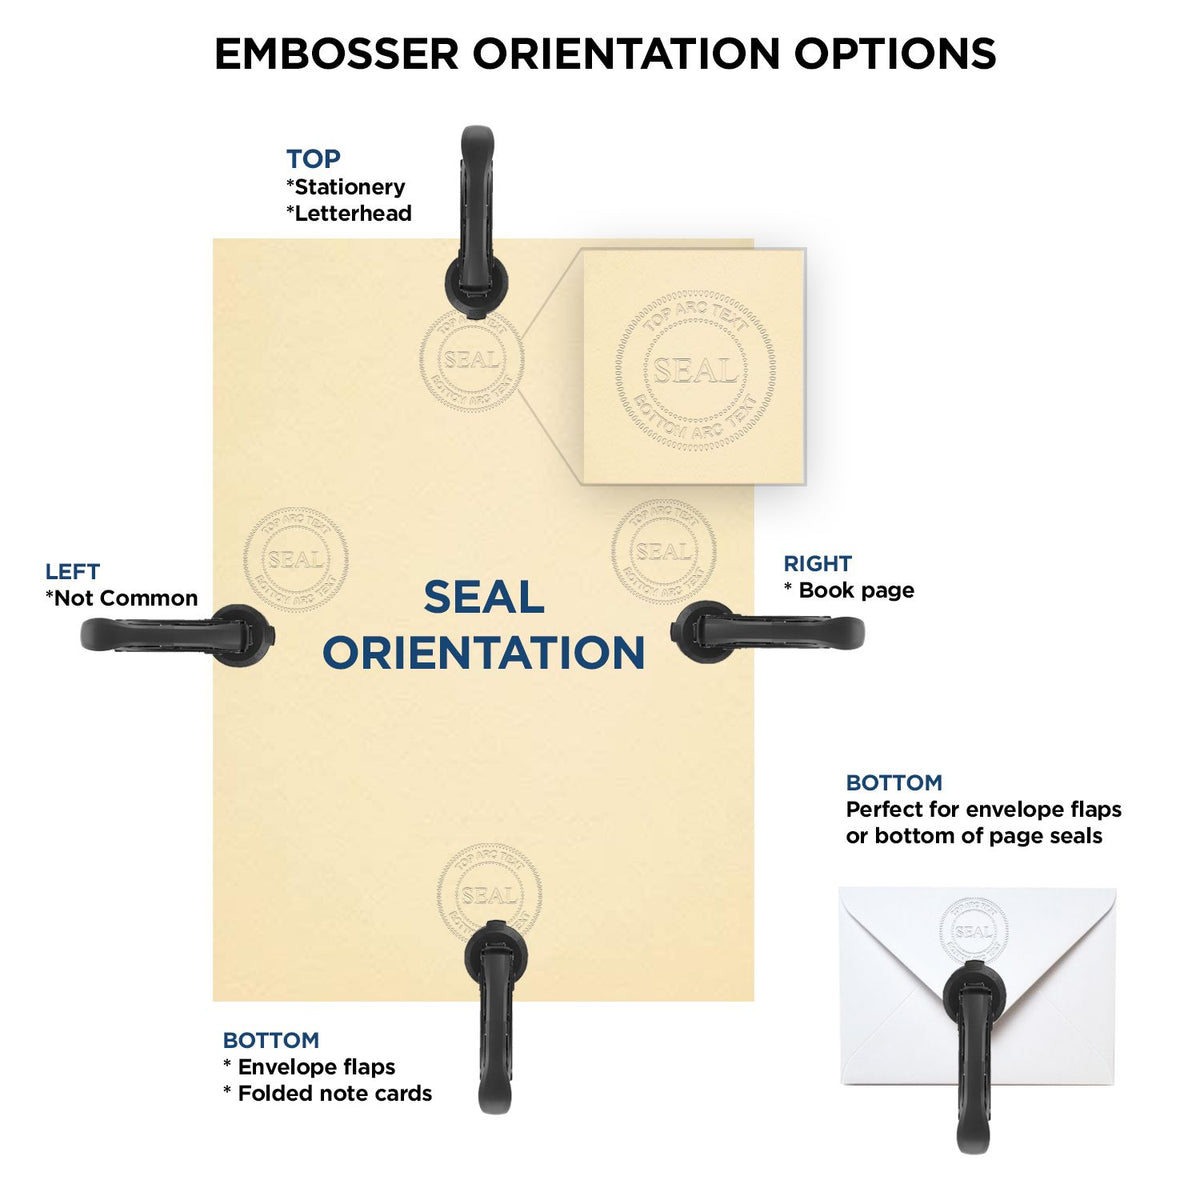 An infographic for the Extended Long Reach Florida Surveyor Embosser showing embosser orientation, this is showing examples of a top, bottom, right and left insert.